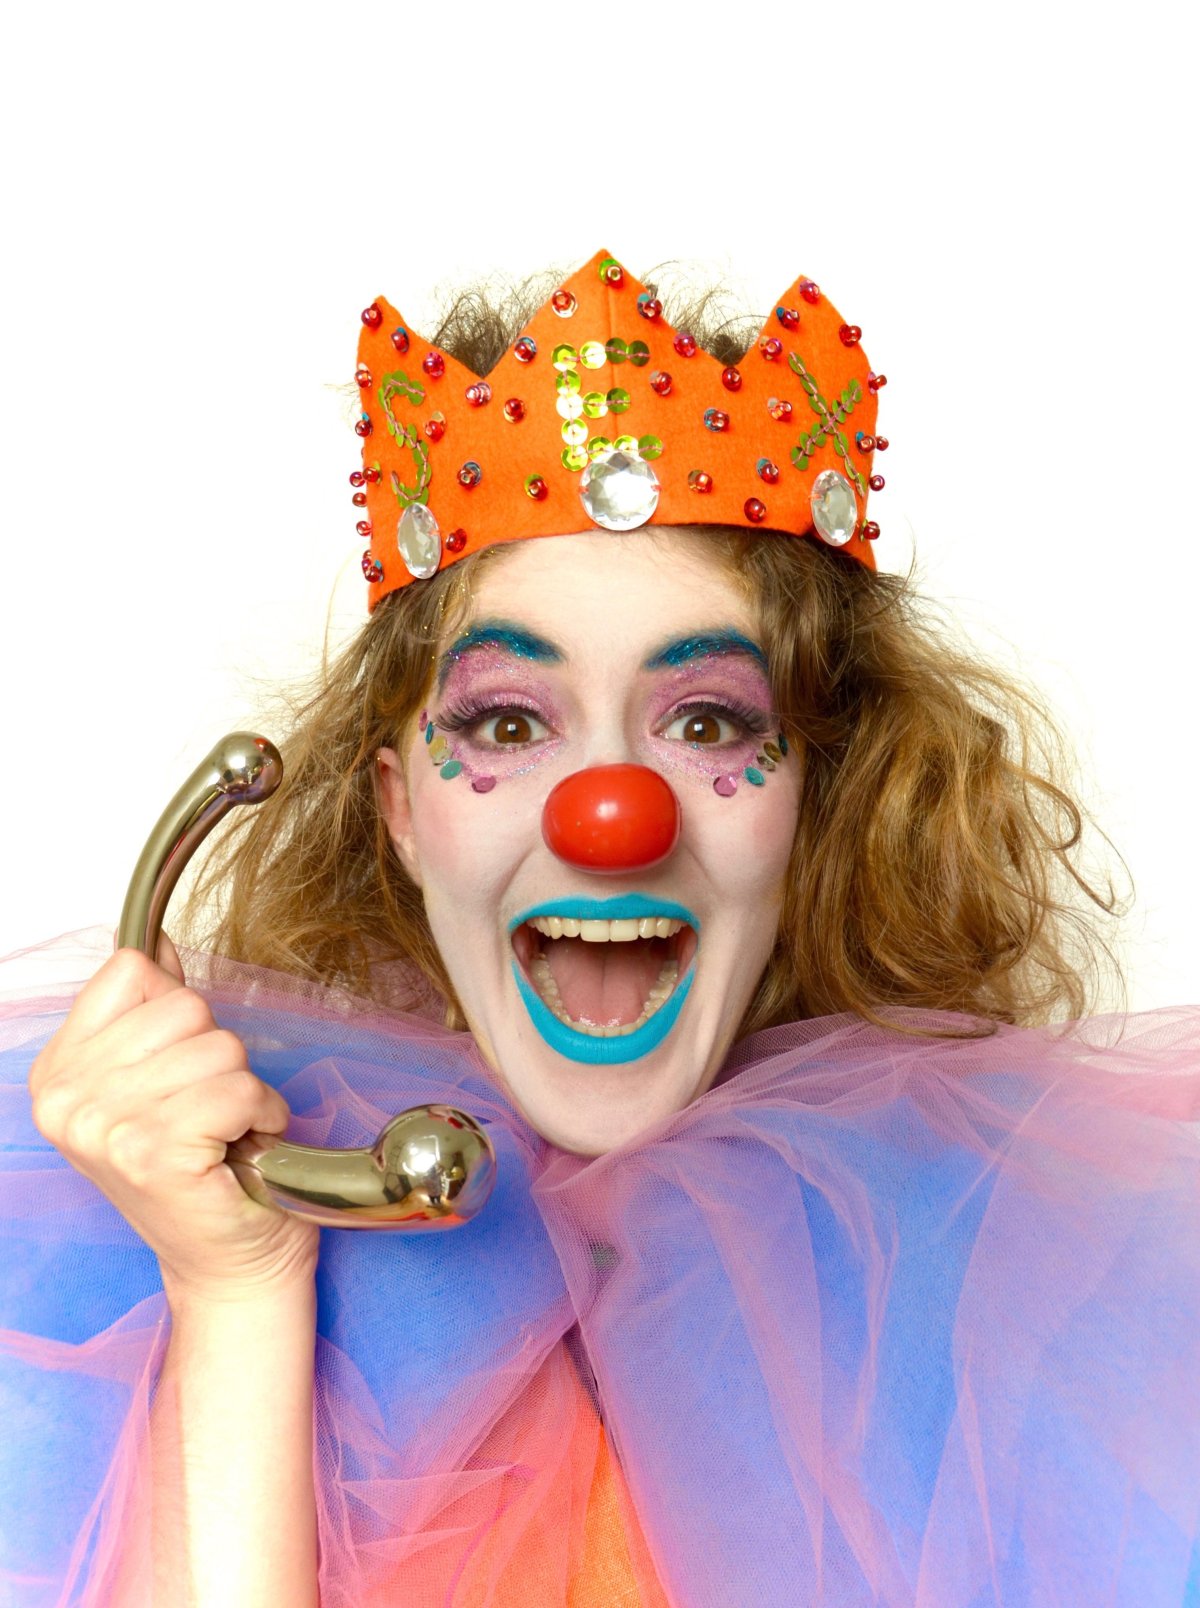 Is That How Clowns Have Sex? A One-Woman, Queer Clown Sex-Ed Show - image